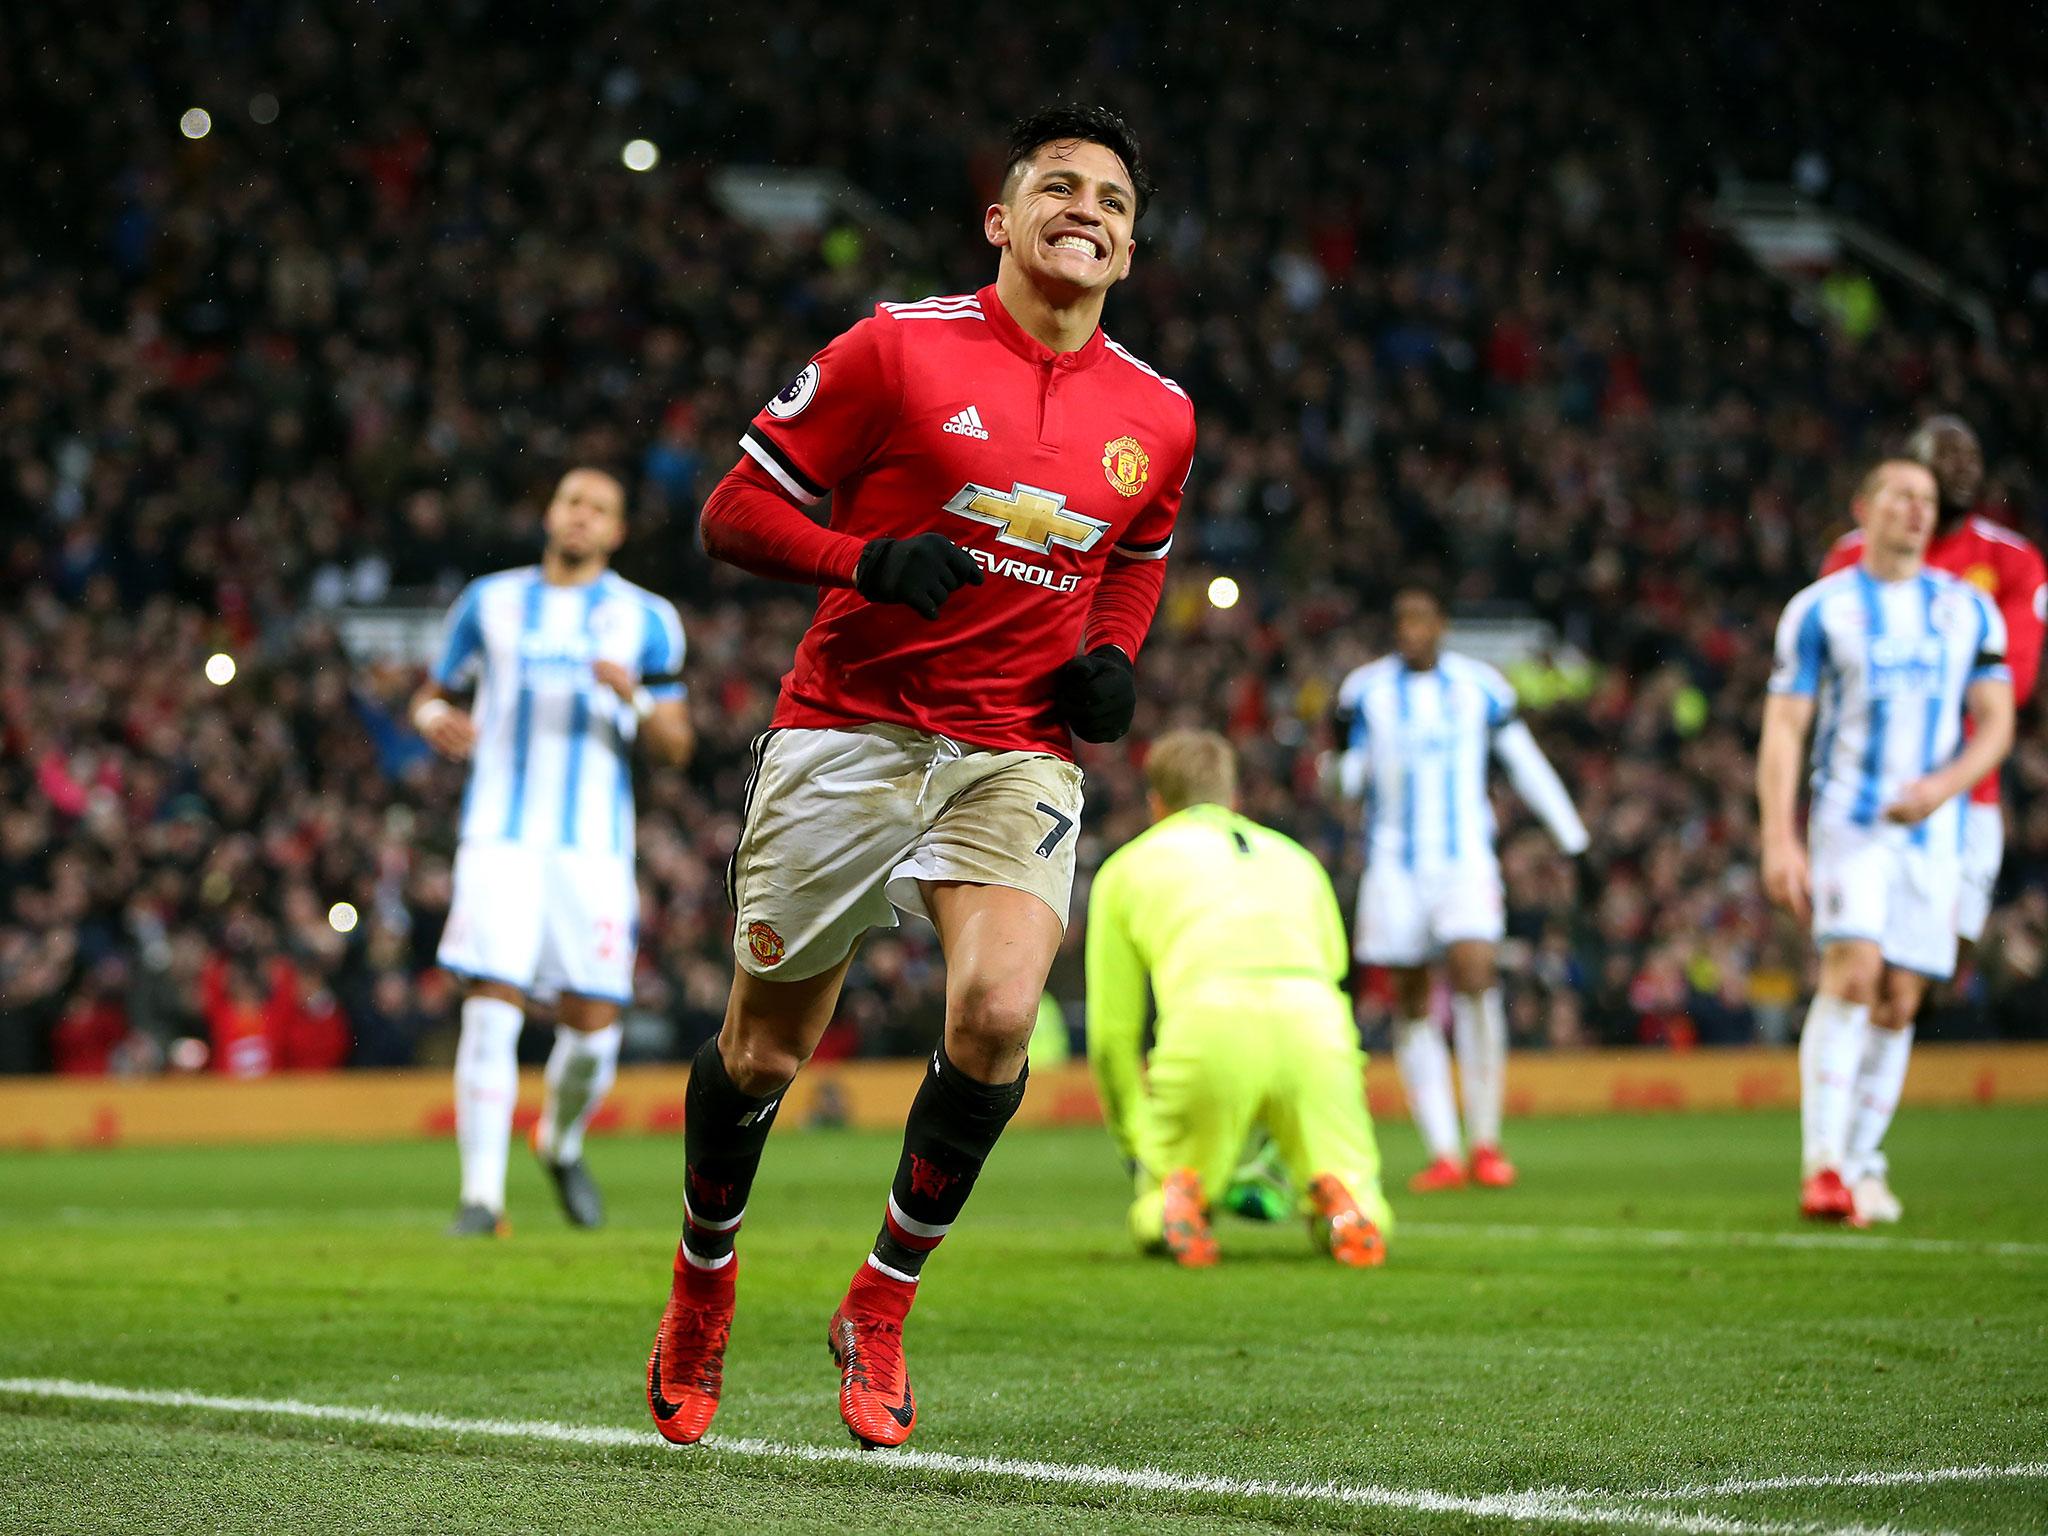 Alexis Sanchez missed his initial penalty attempt but followed it up with a first goal for United